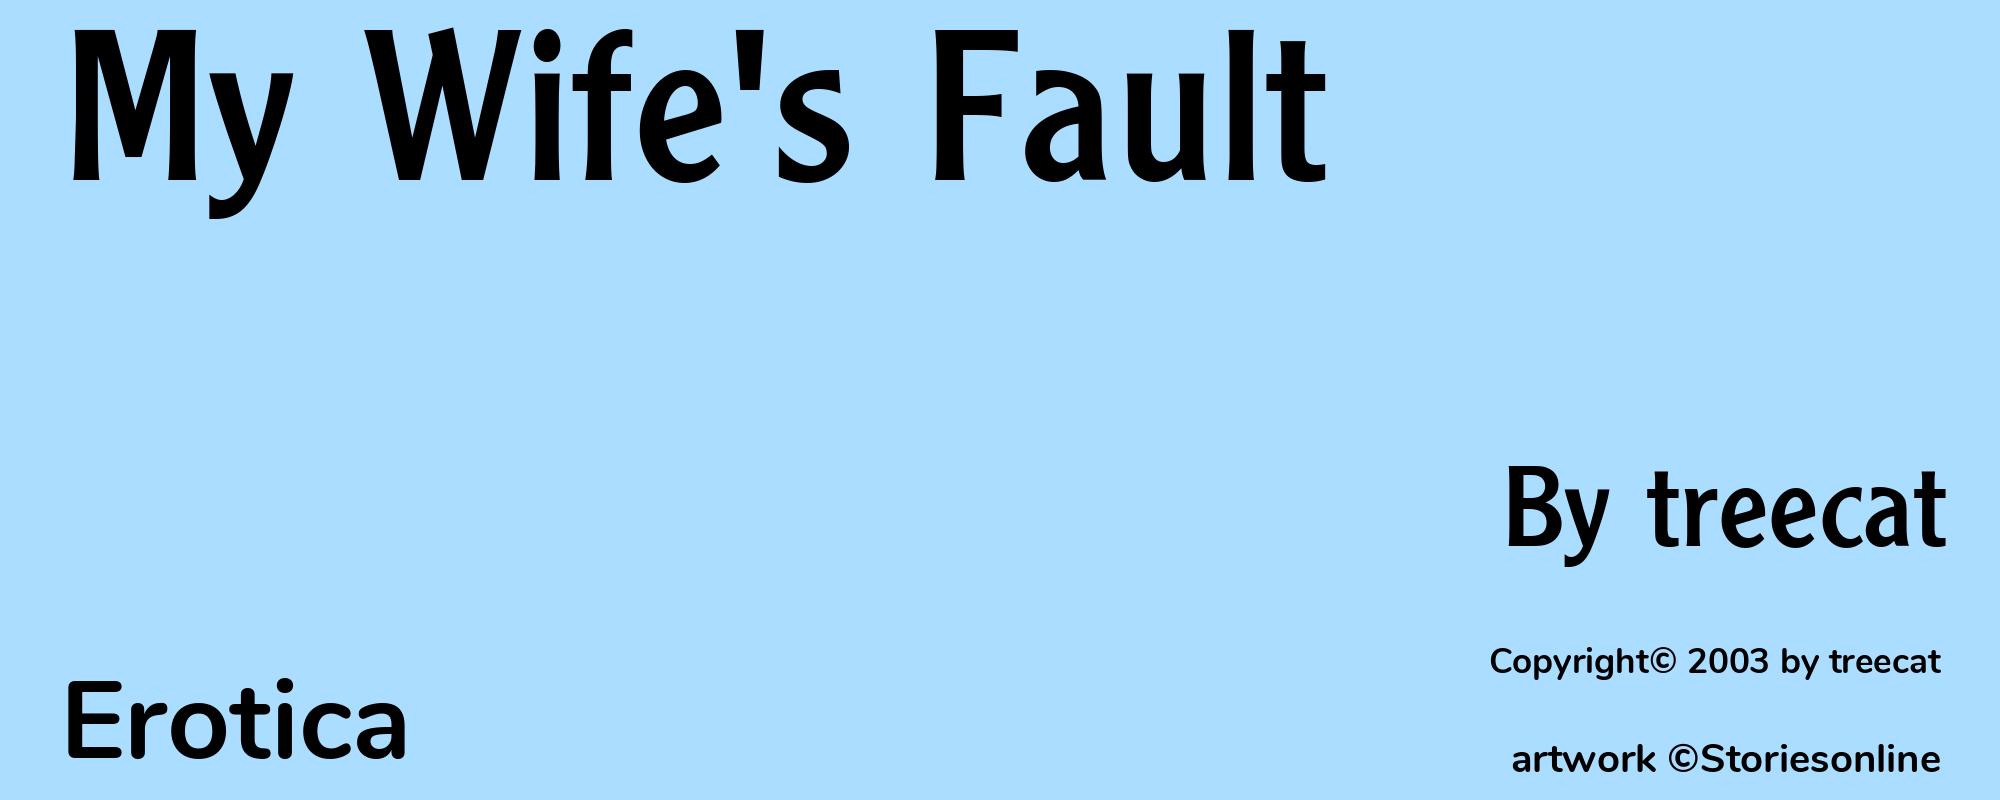 My Wife's Fault - Cover